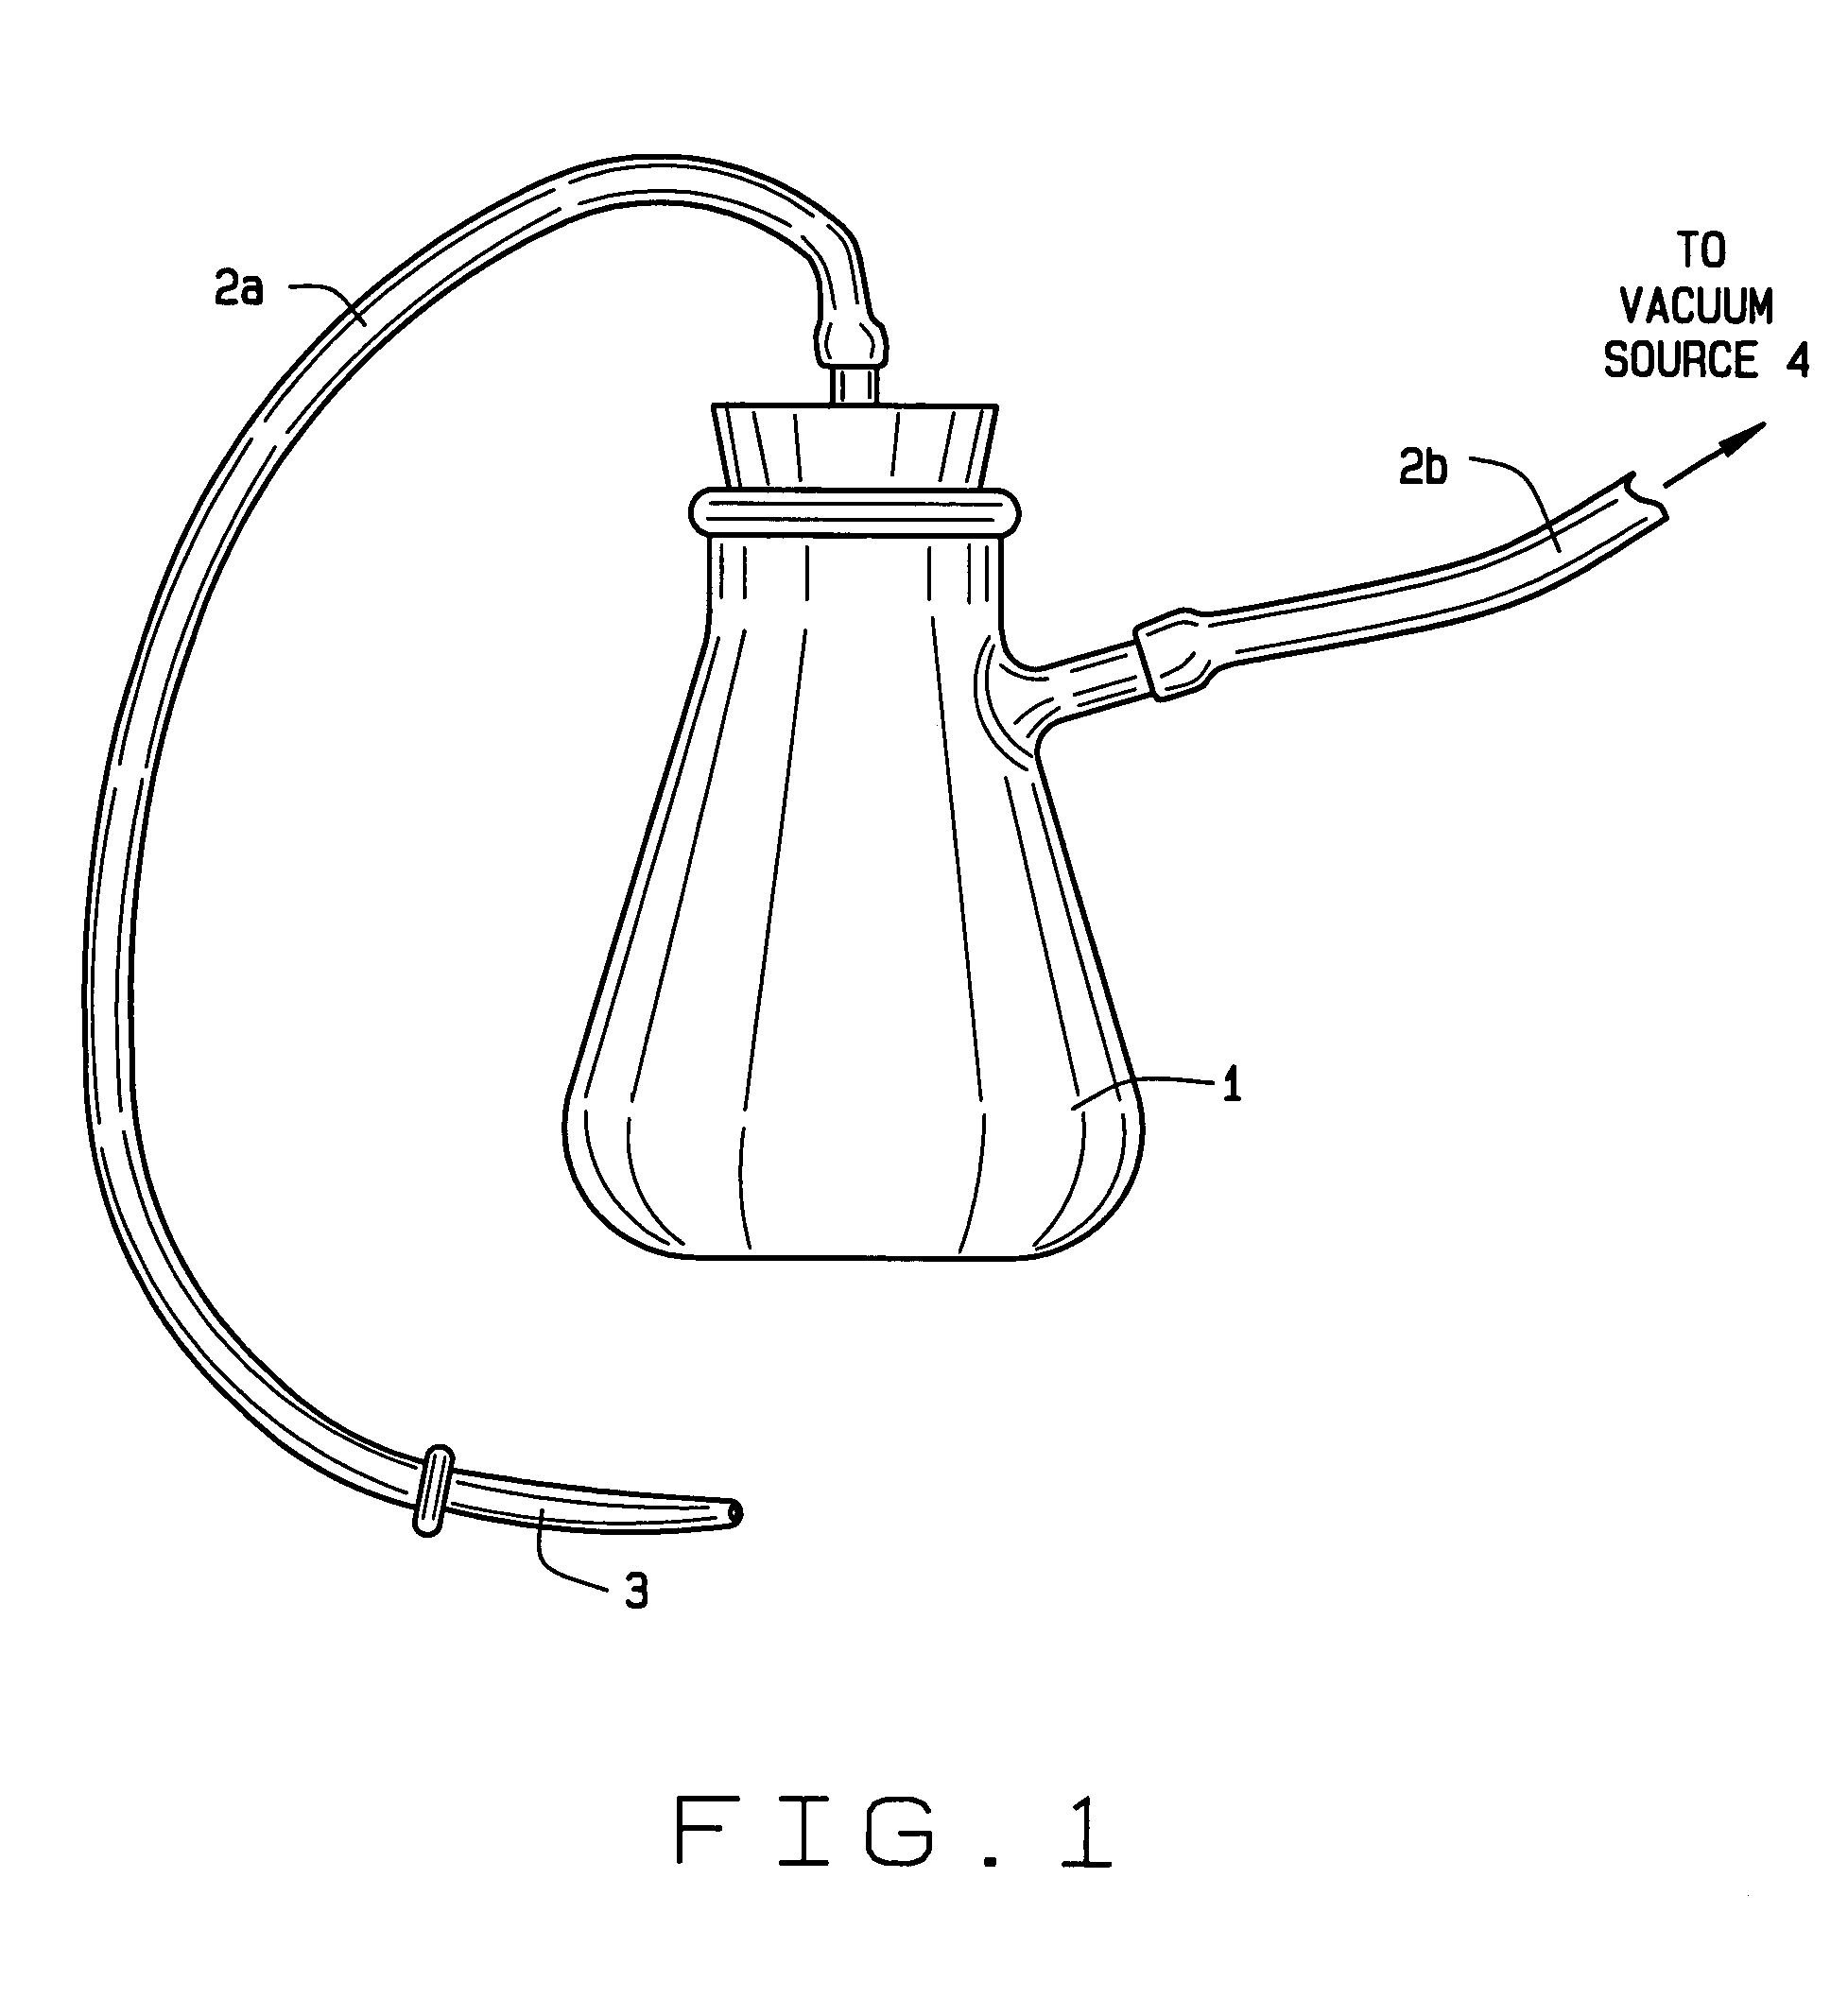 Method for excision of plant embryos for transformation